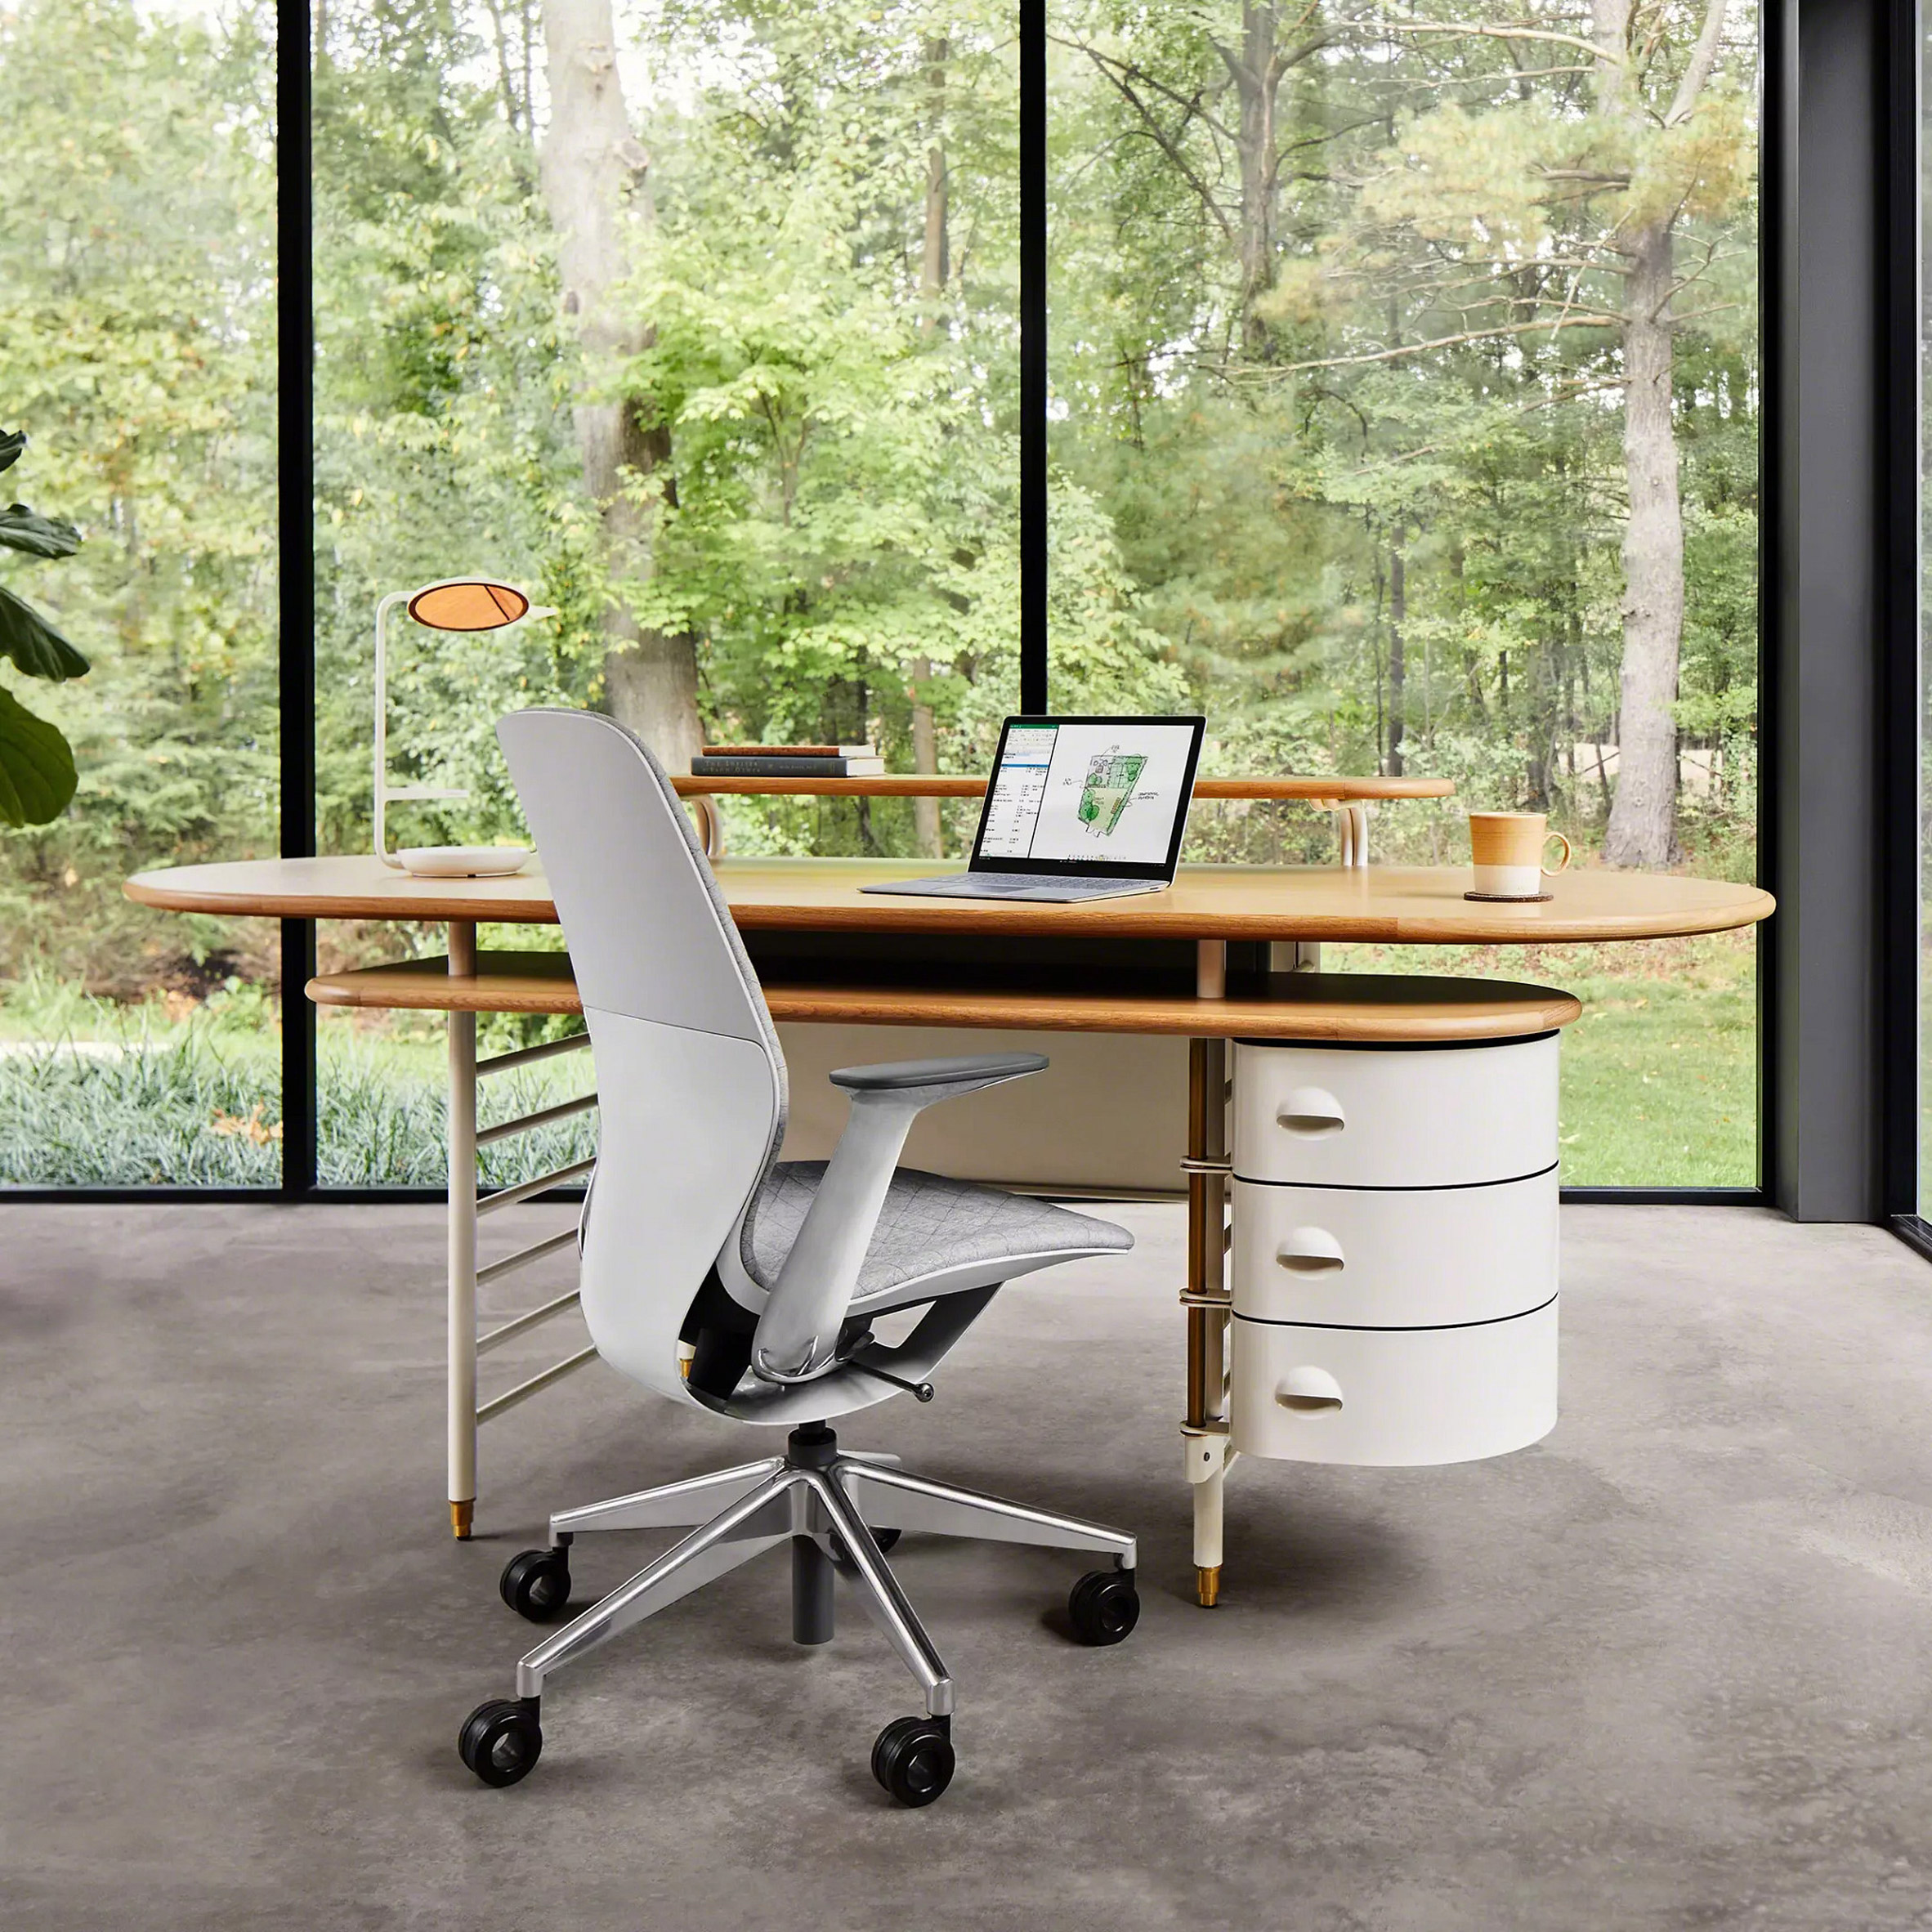 Steelcase launches furniture line based on Frank Lloyd Wright designs